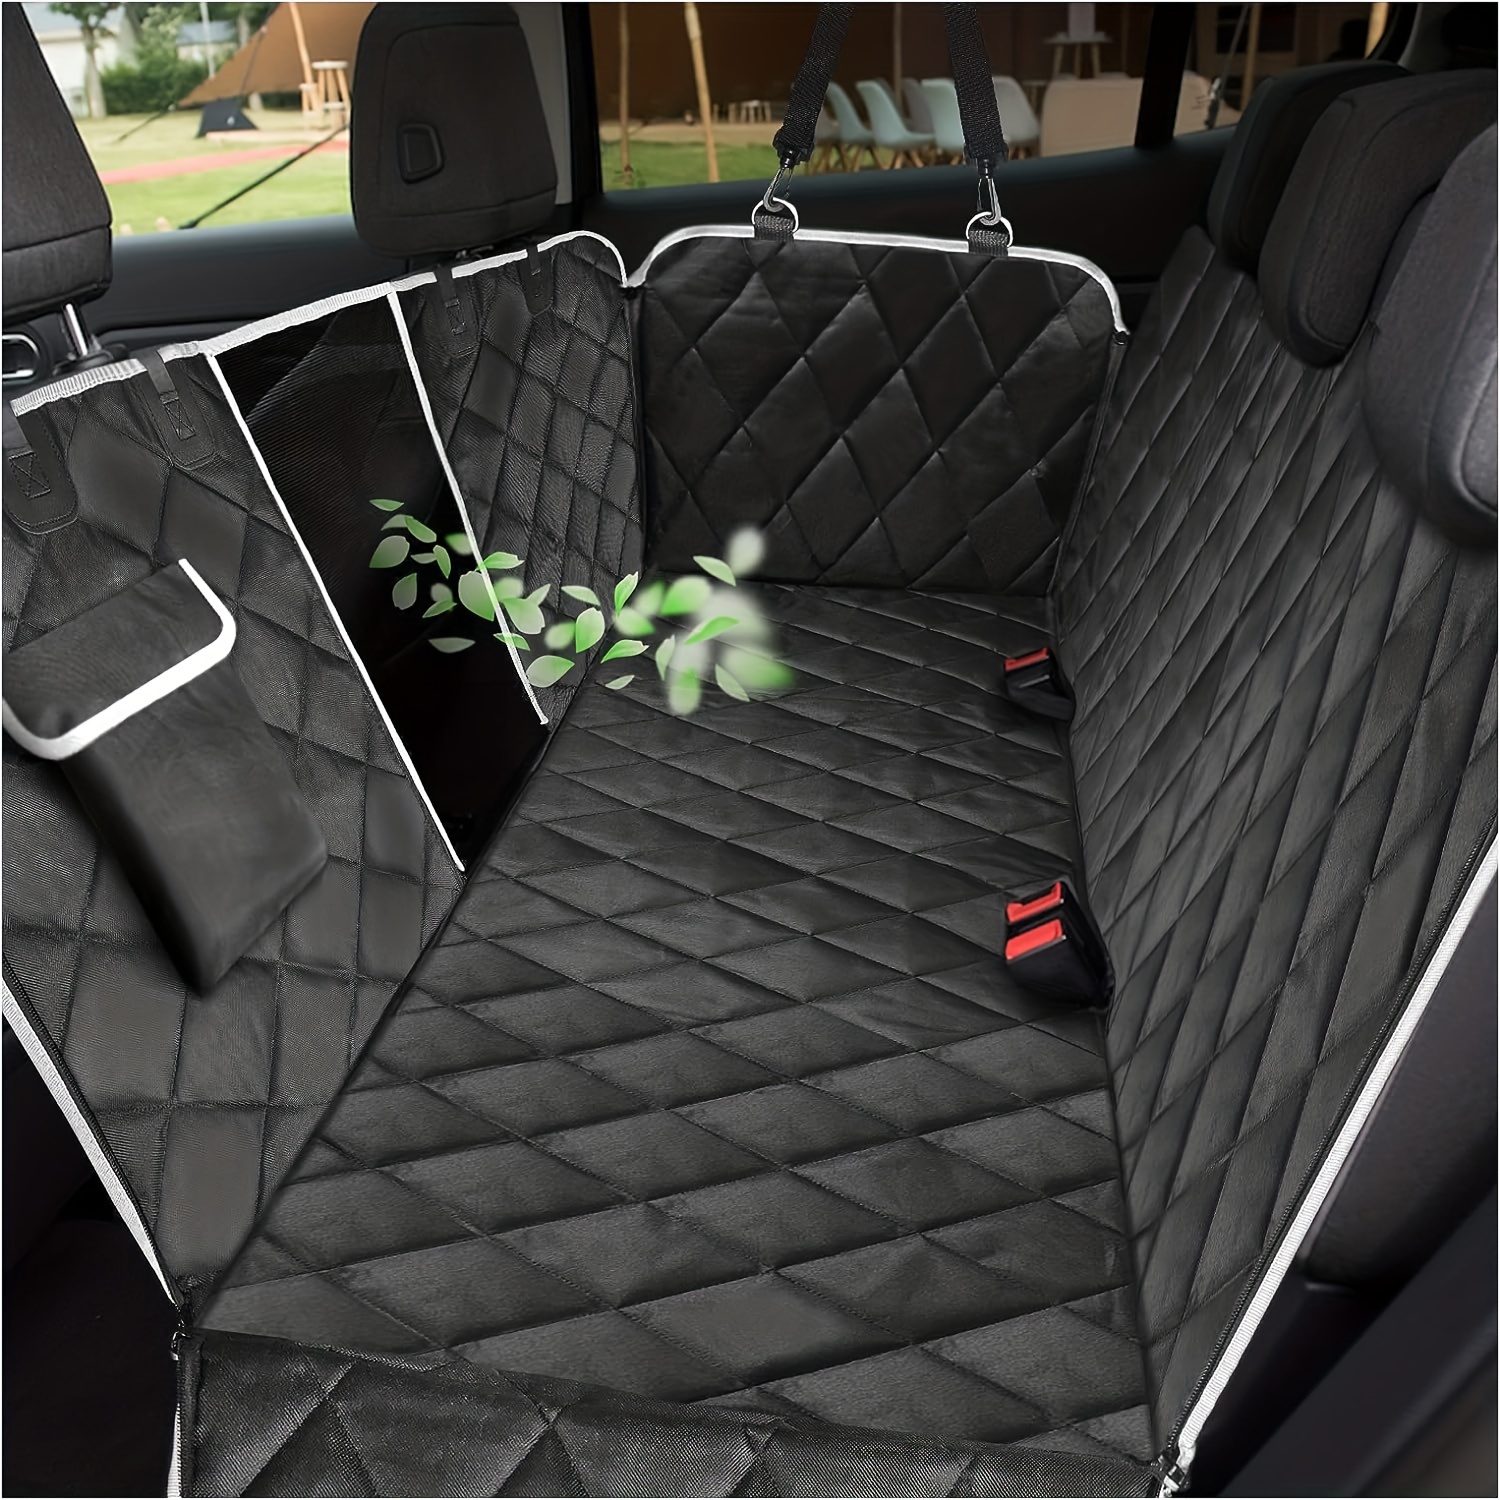 Heavy Duty Waterproof Dog Seat Cover For Cars, Trucks, And Suvs - Nonslip  Backing And Hammock Convertible - Protects Seats From Pet Hair, Scratches,  And Dirt - Temu